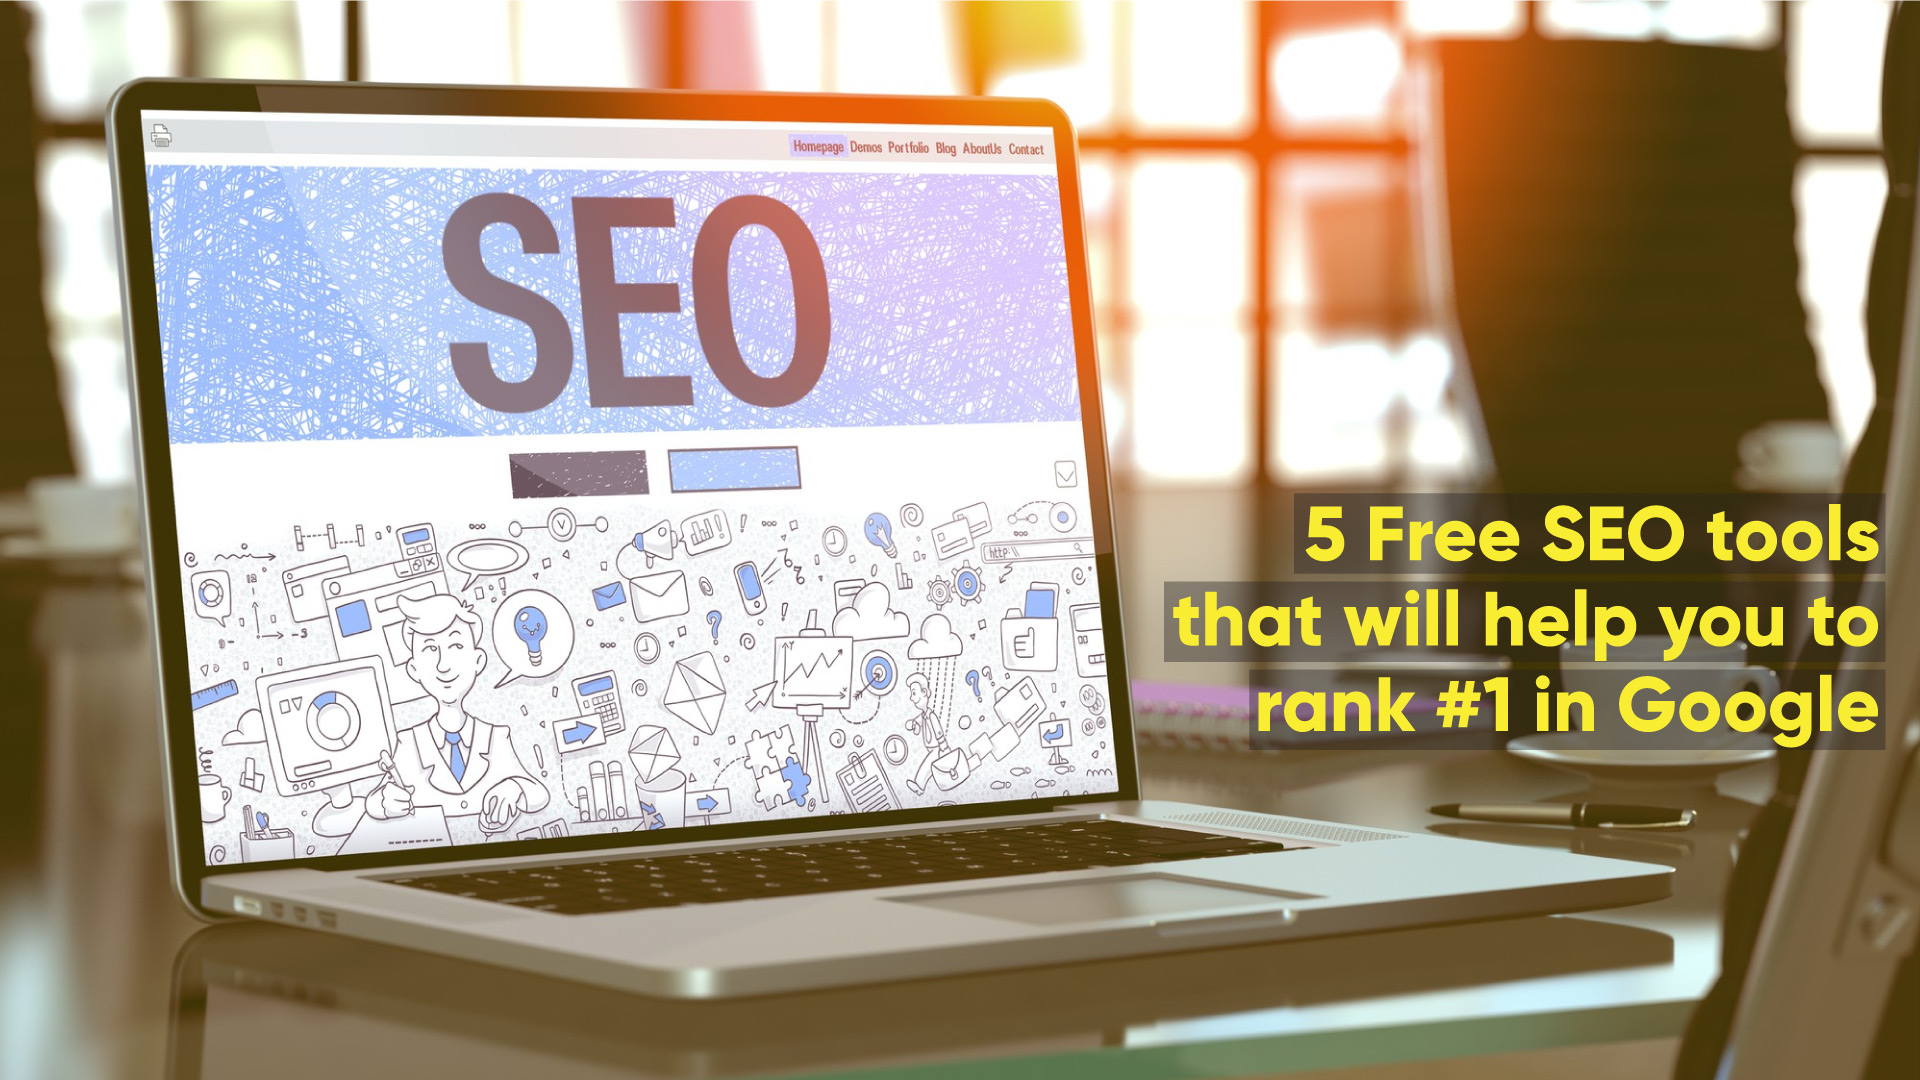 5-Free-SEO-tools-that-will-help-you-to-rank-1-in-Google